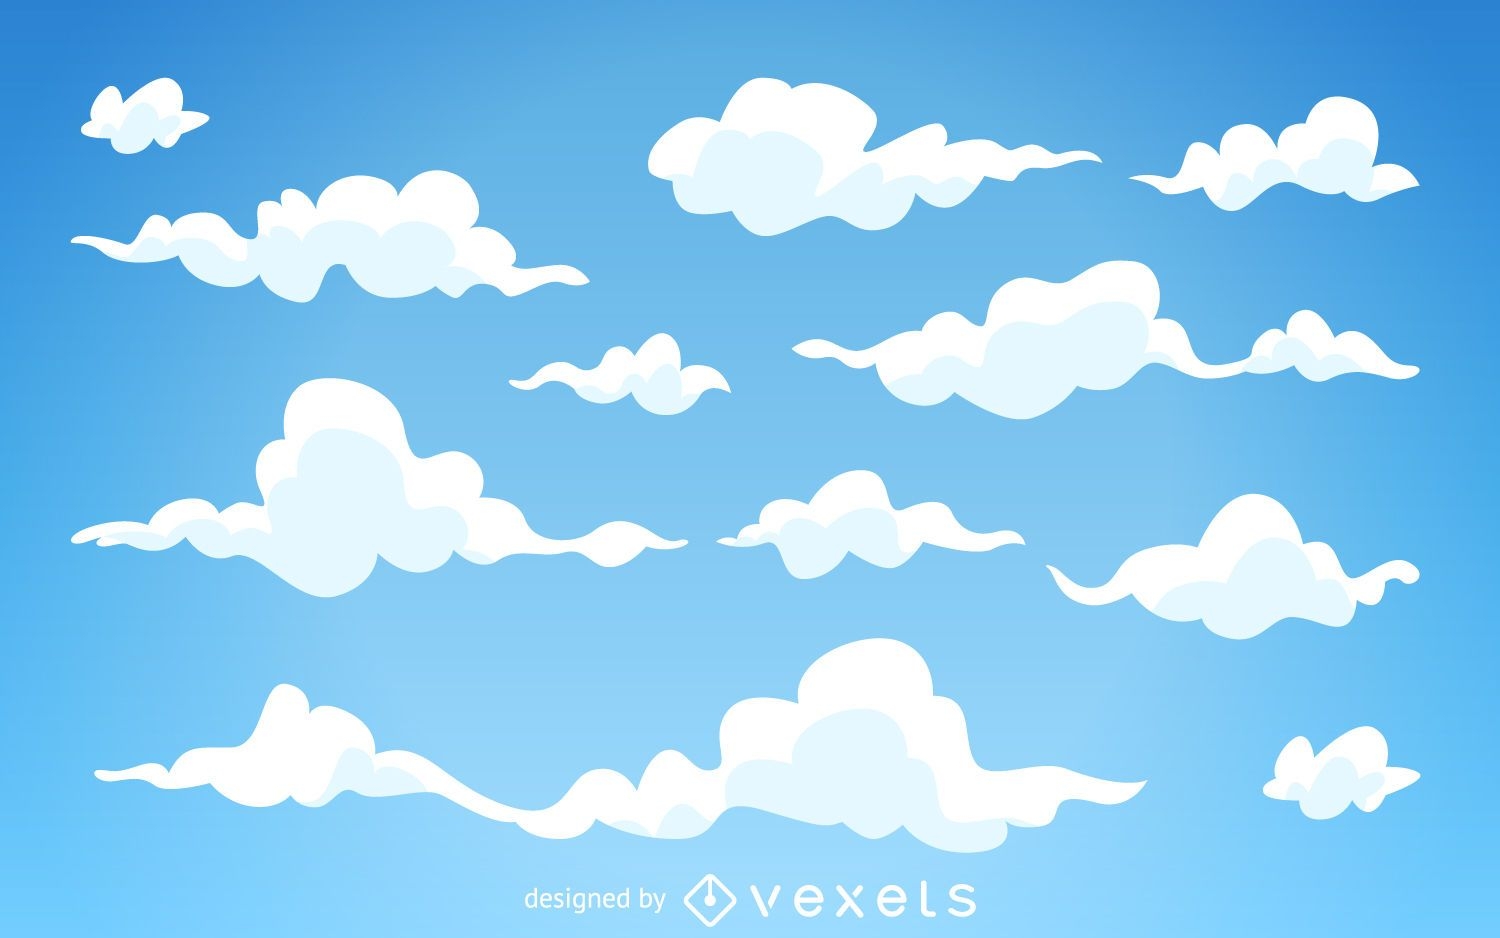 Illustrated cartoon clouds background